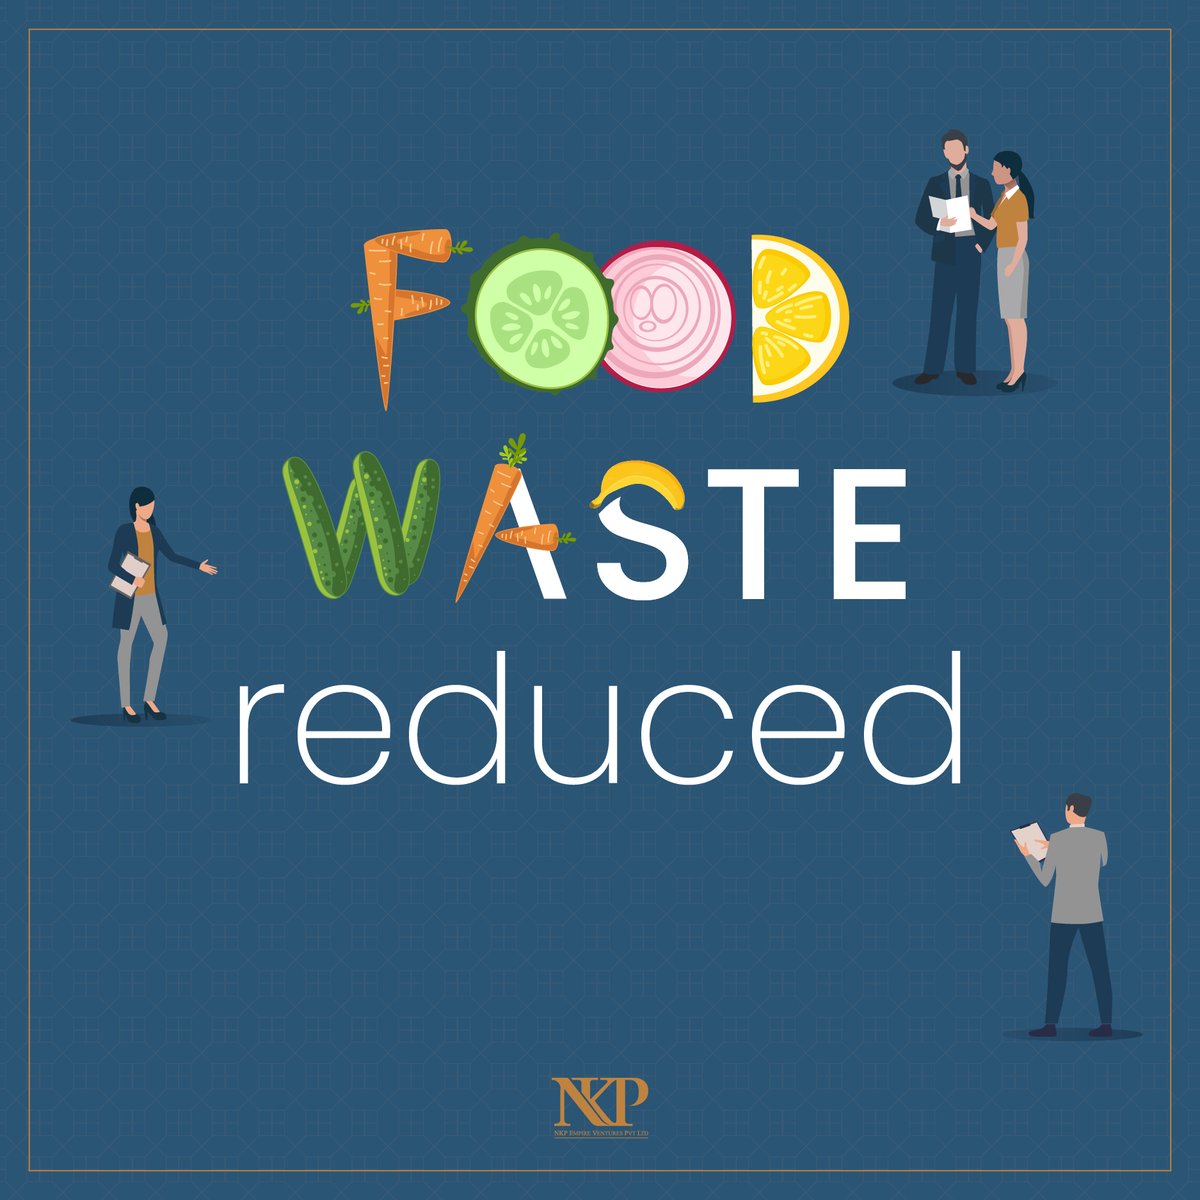 At NKP Empire, we believe in using our resources responsibly. Our dedicated night audit team ensures responsible waste management, reducing our environmental impact. ​

#NKPEmpire #SustainablePractices #ReduceWaste #PositiveImpact